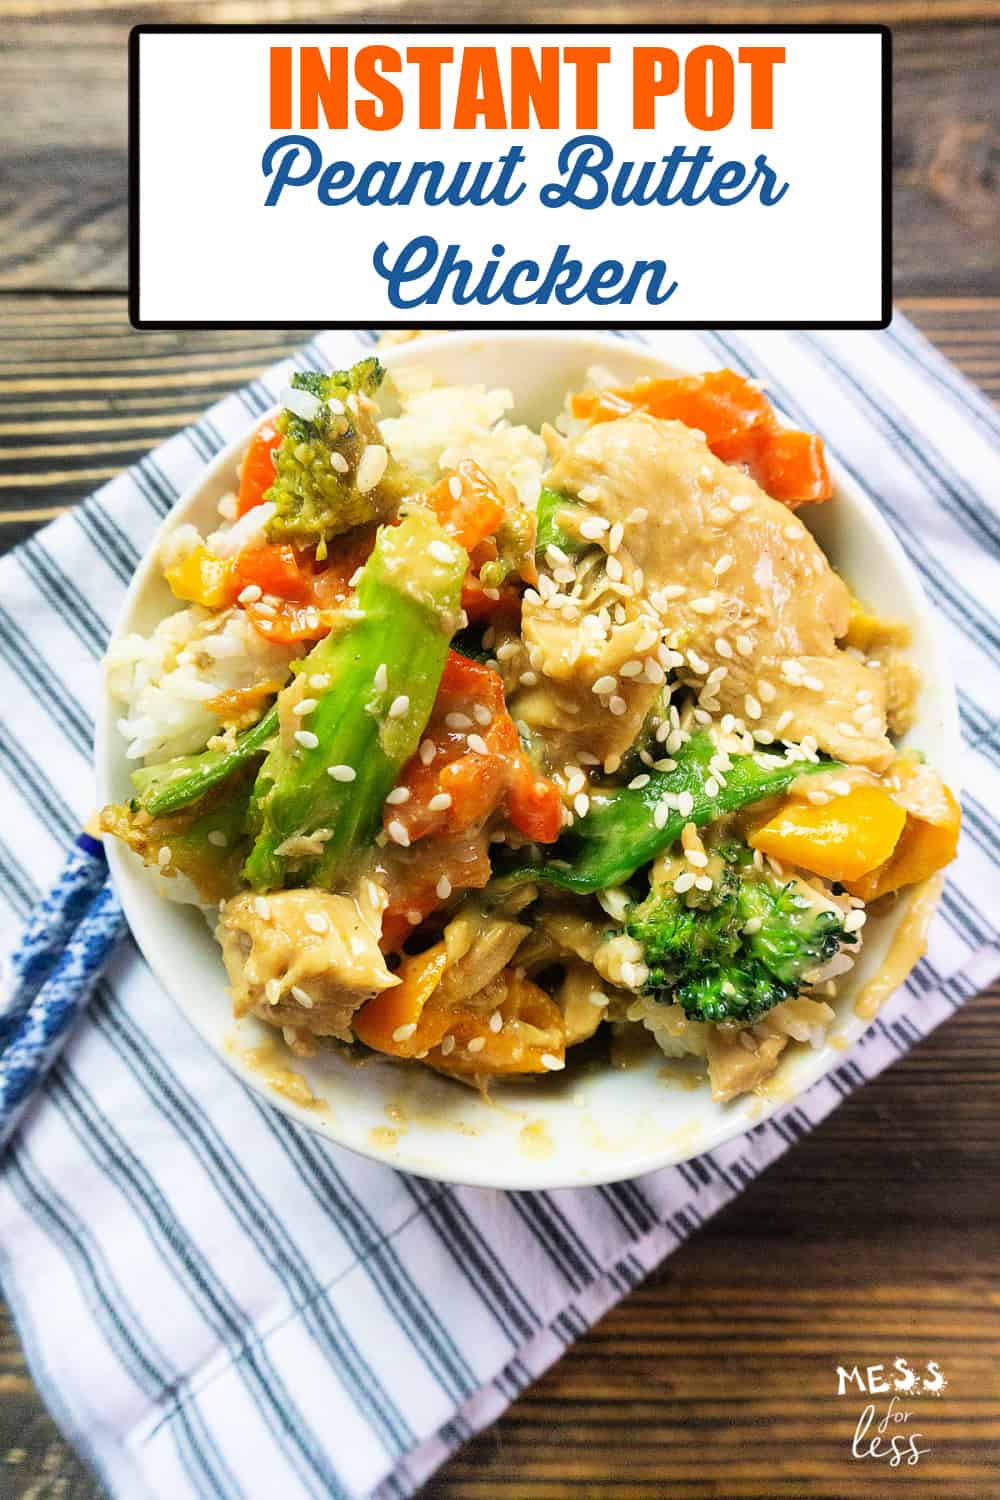 Peanut Butter Chicken in the Instant Pot